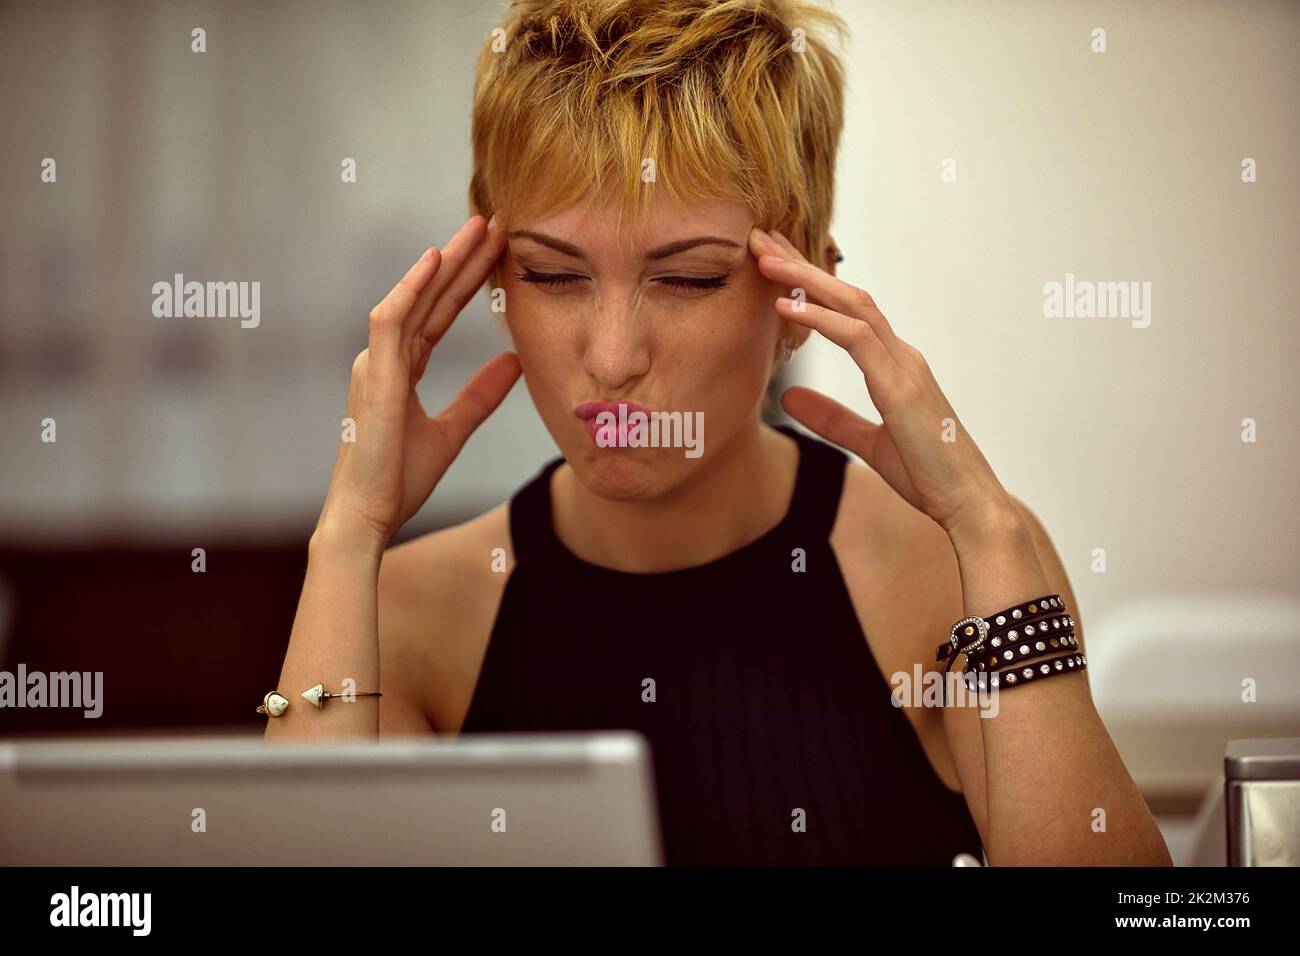 Stressed young businesswoman rubbing her temples in pain Stock Photo